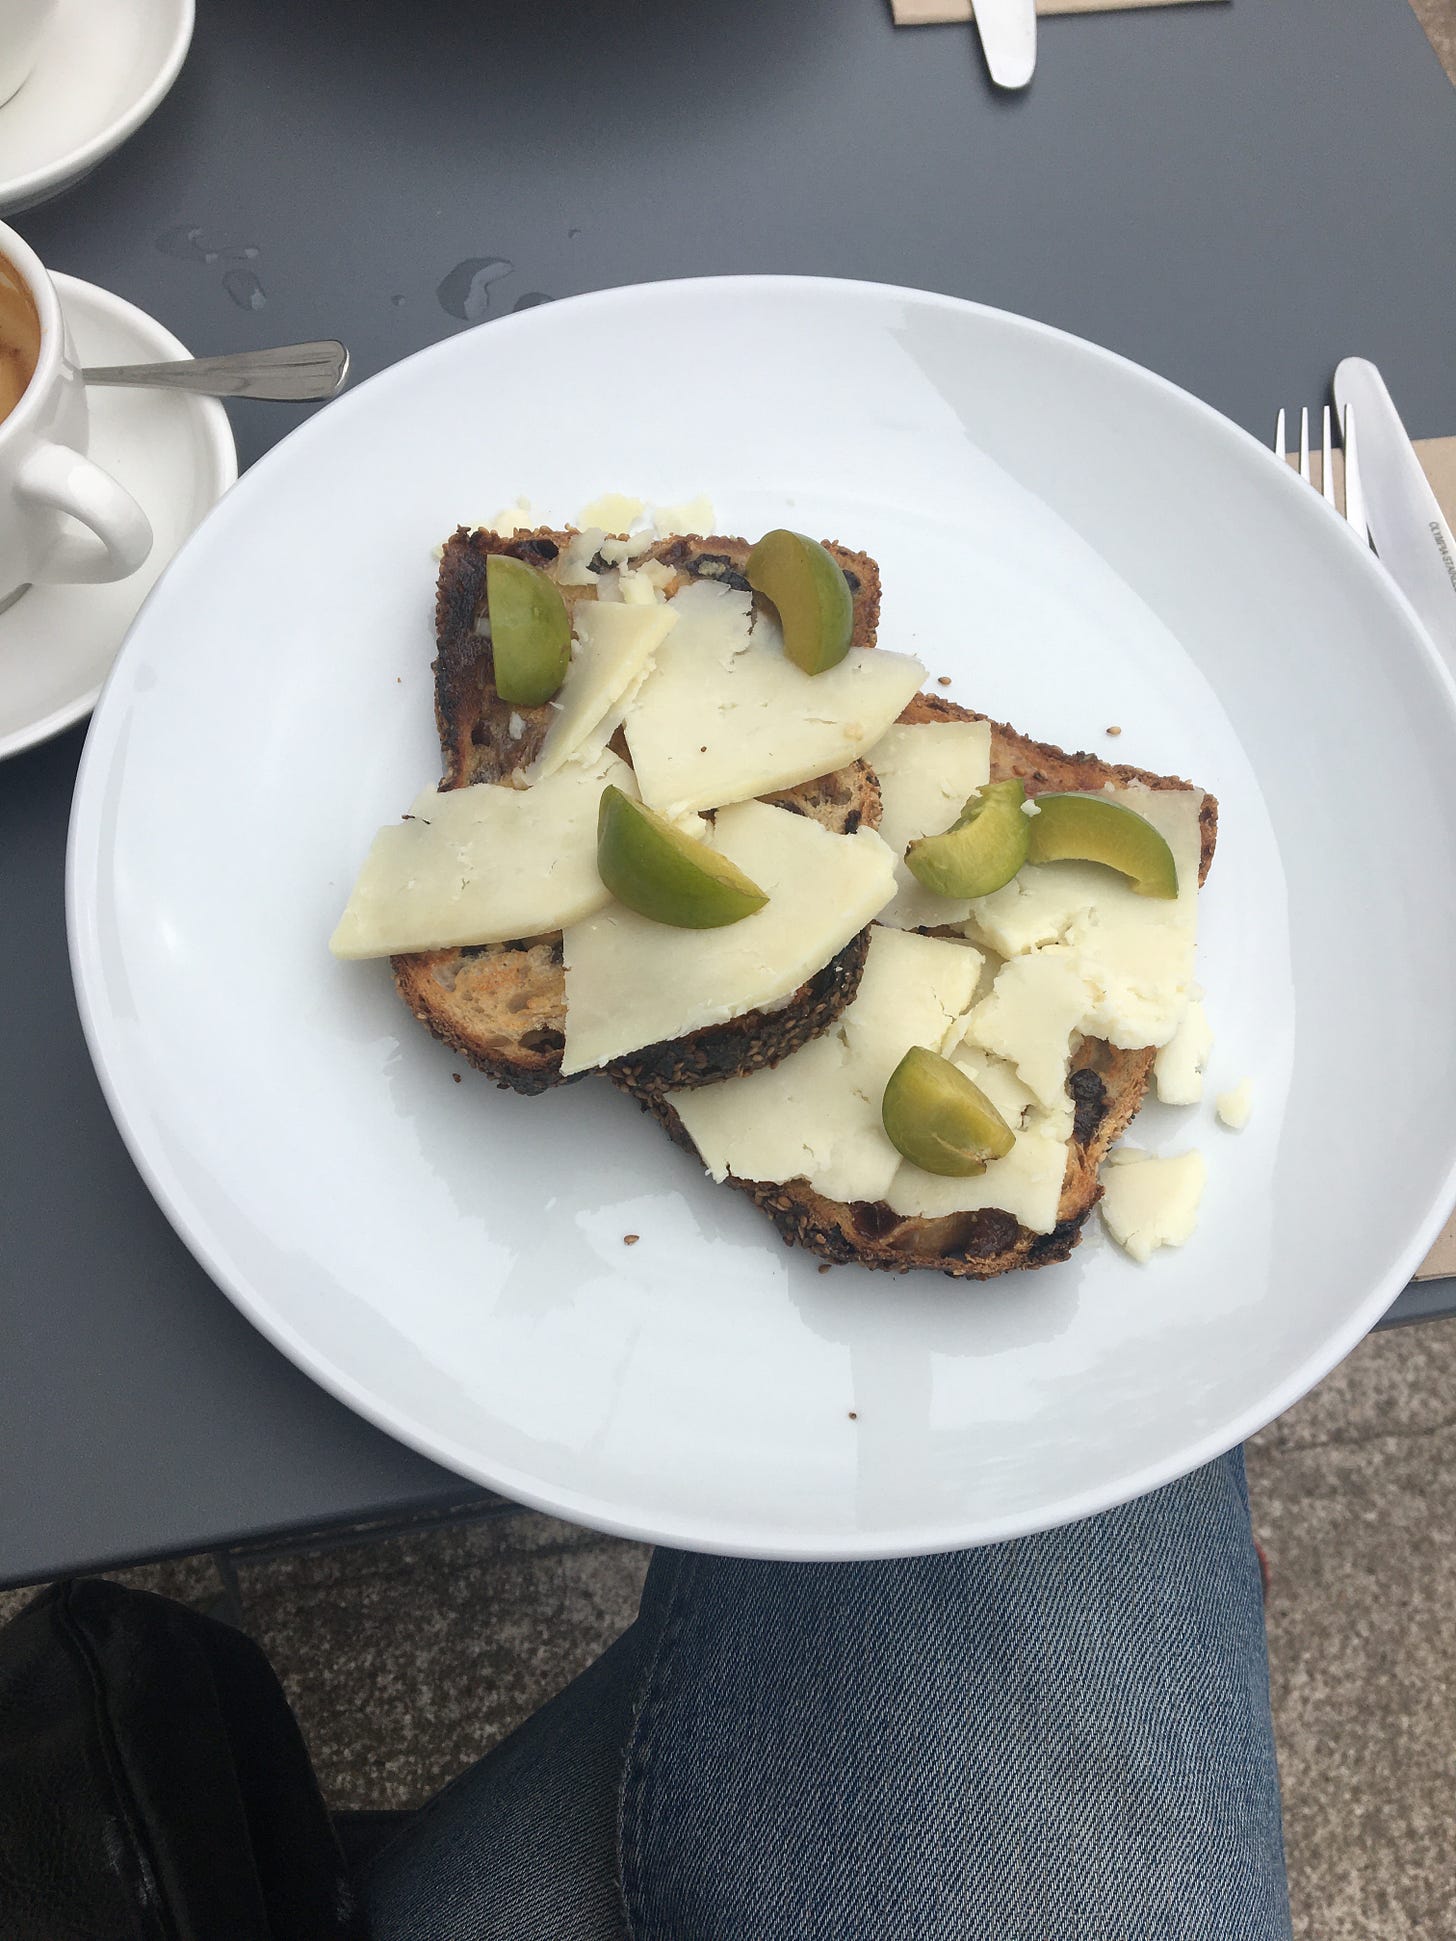 An outdoor photo of white modern crockery against a grey metal table, Kate's jeans underneath. There is some cutlery to the right, and a cup of drunk coffee cut off by the frame. On the central plate are two slices of toast, with a pale hard cheese with green plum-like segments dotted over. 